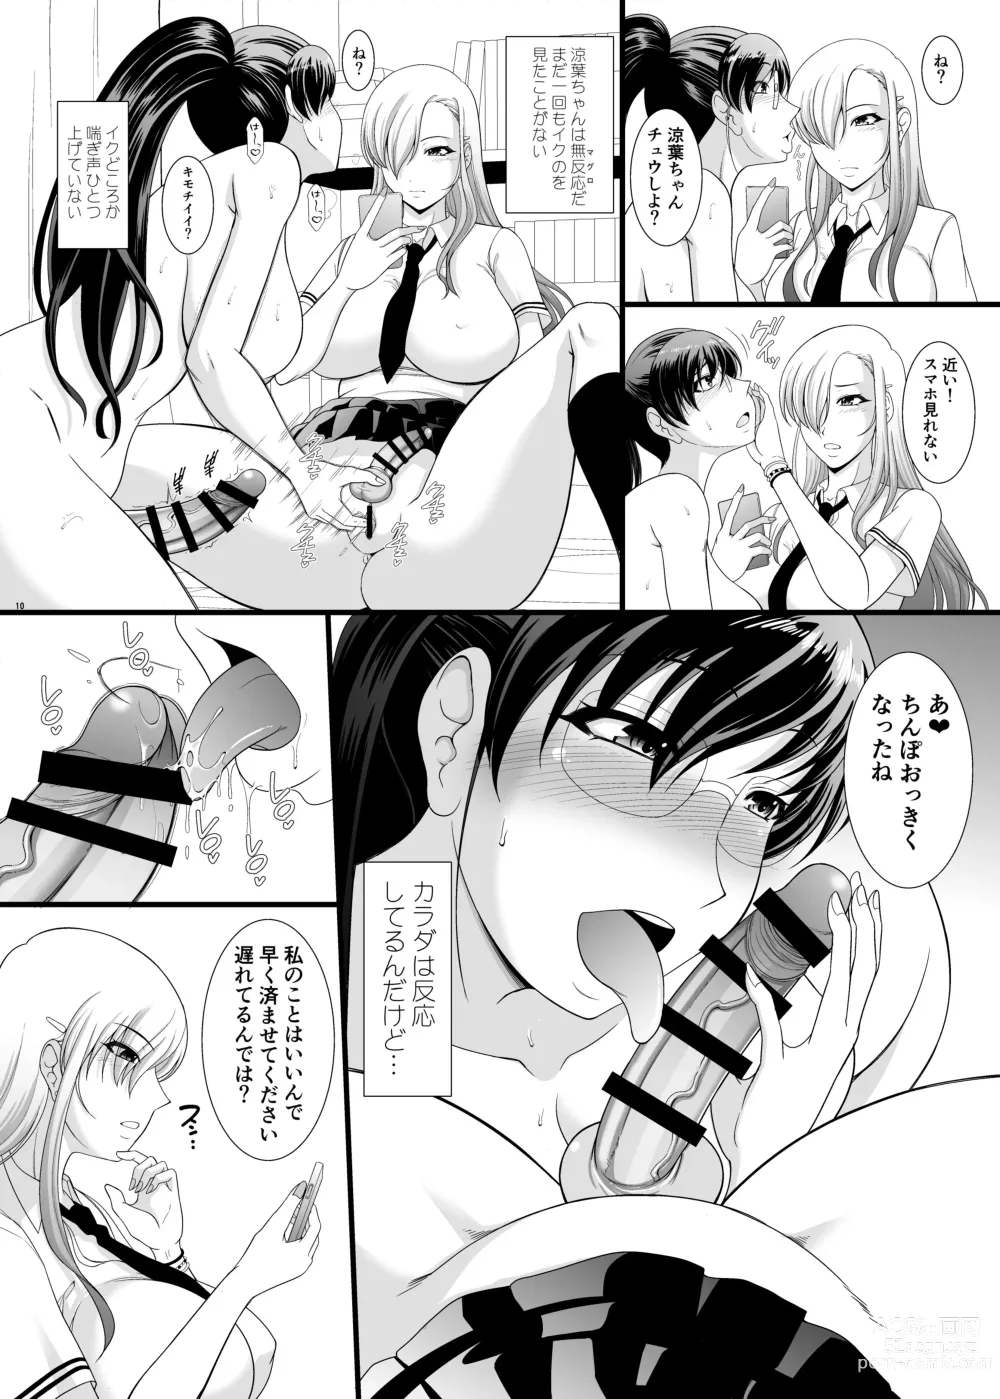 Page 9 of doujinshi Im a futanari manga artist, but my sex processing assistant seems unresponsive and my propensity seems to be distorted